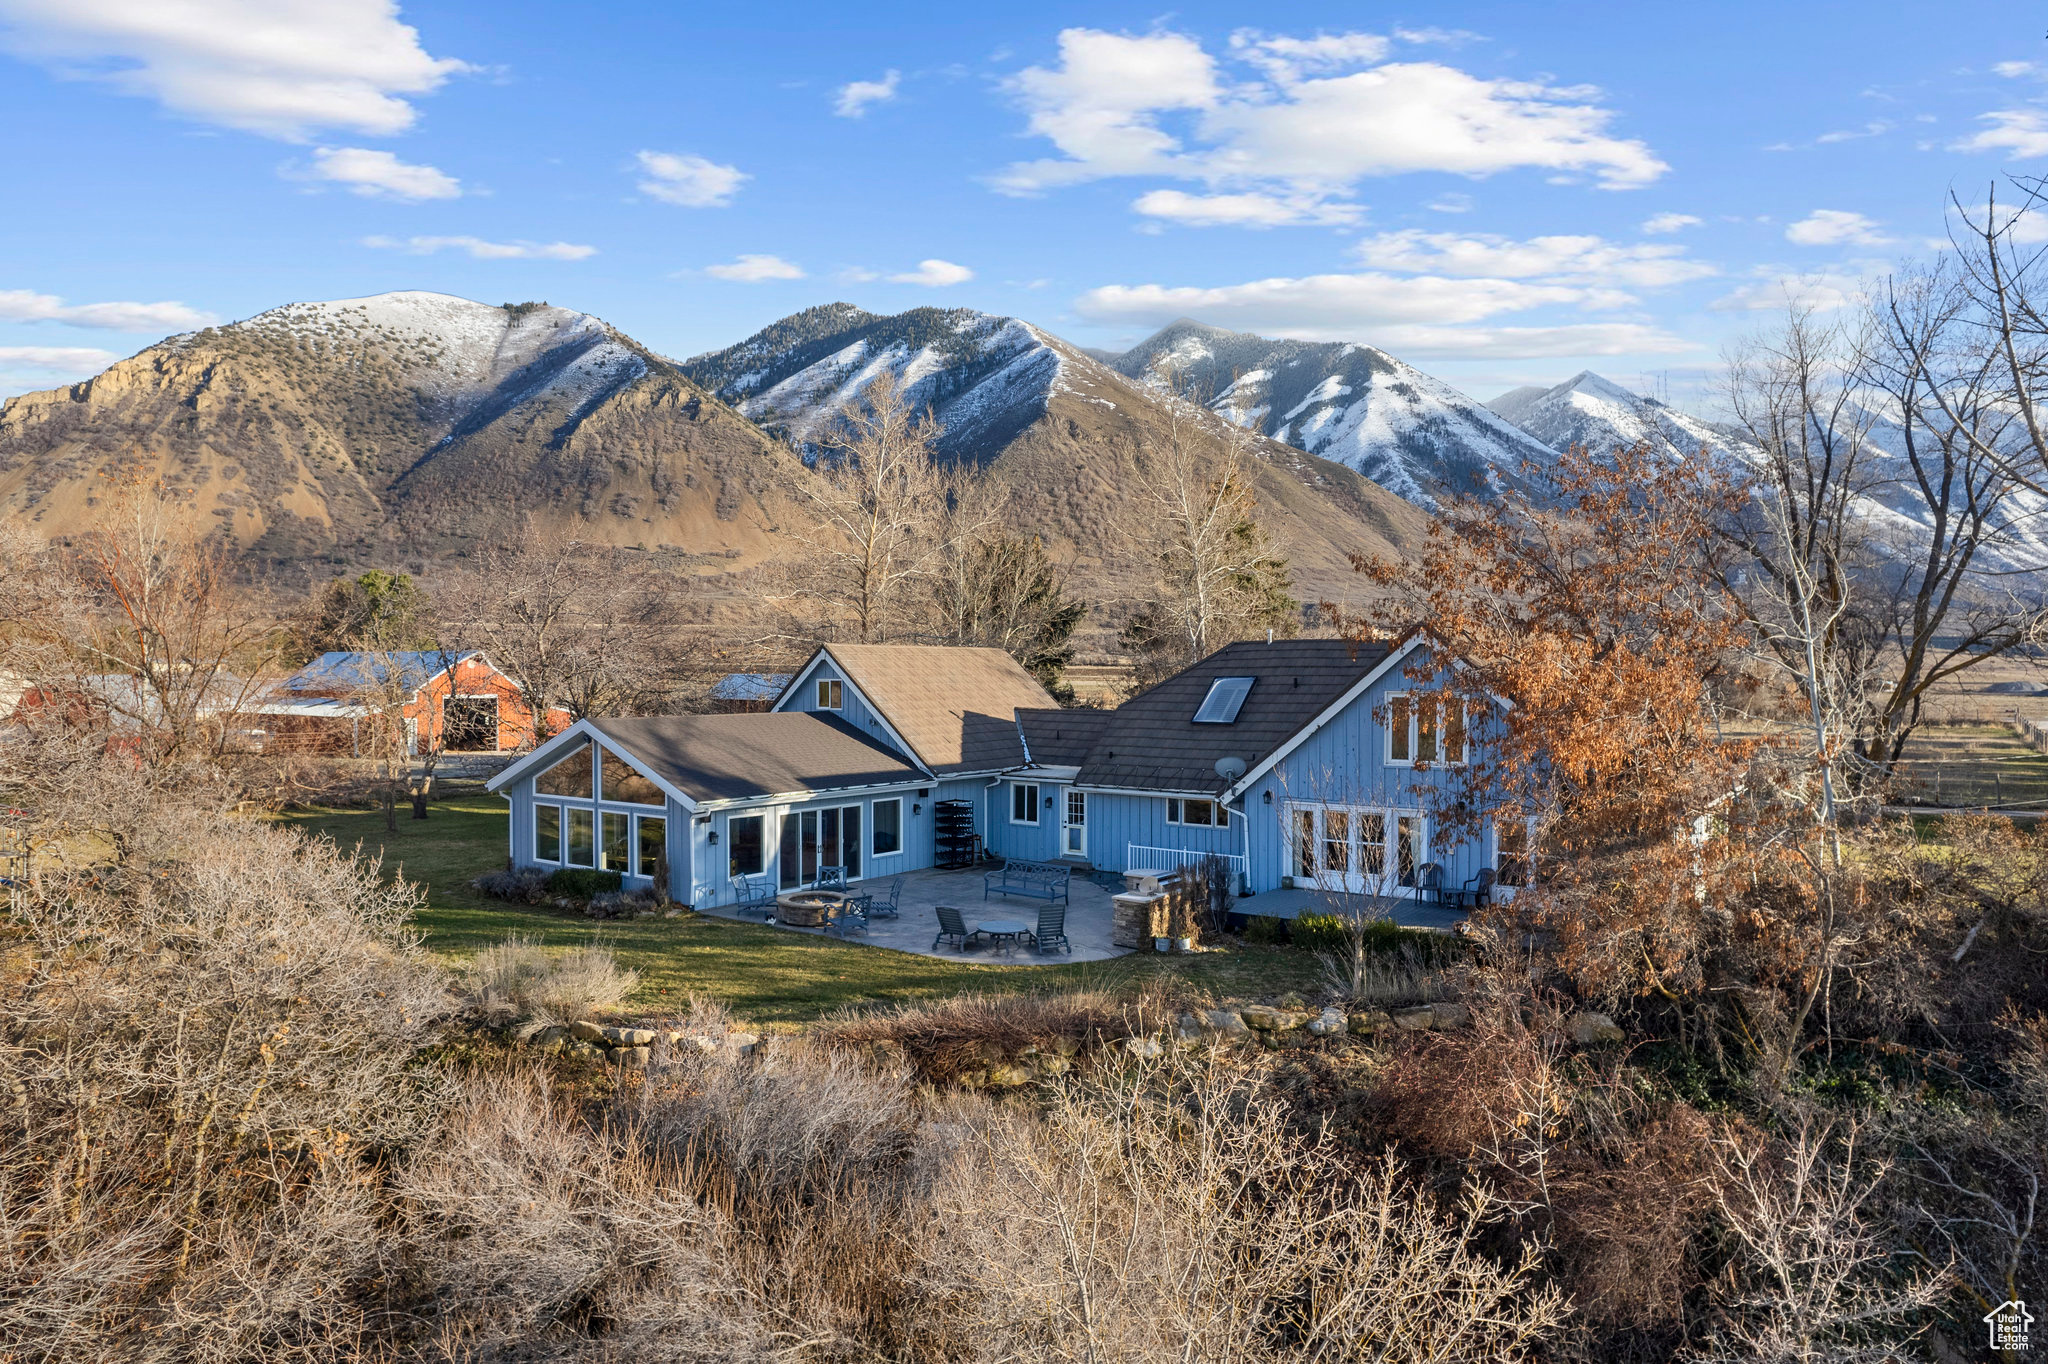 Drone view of the home and mountains looking to the southeast. Check out the views.